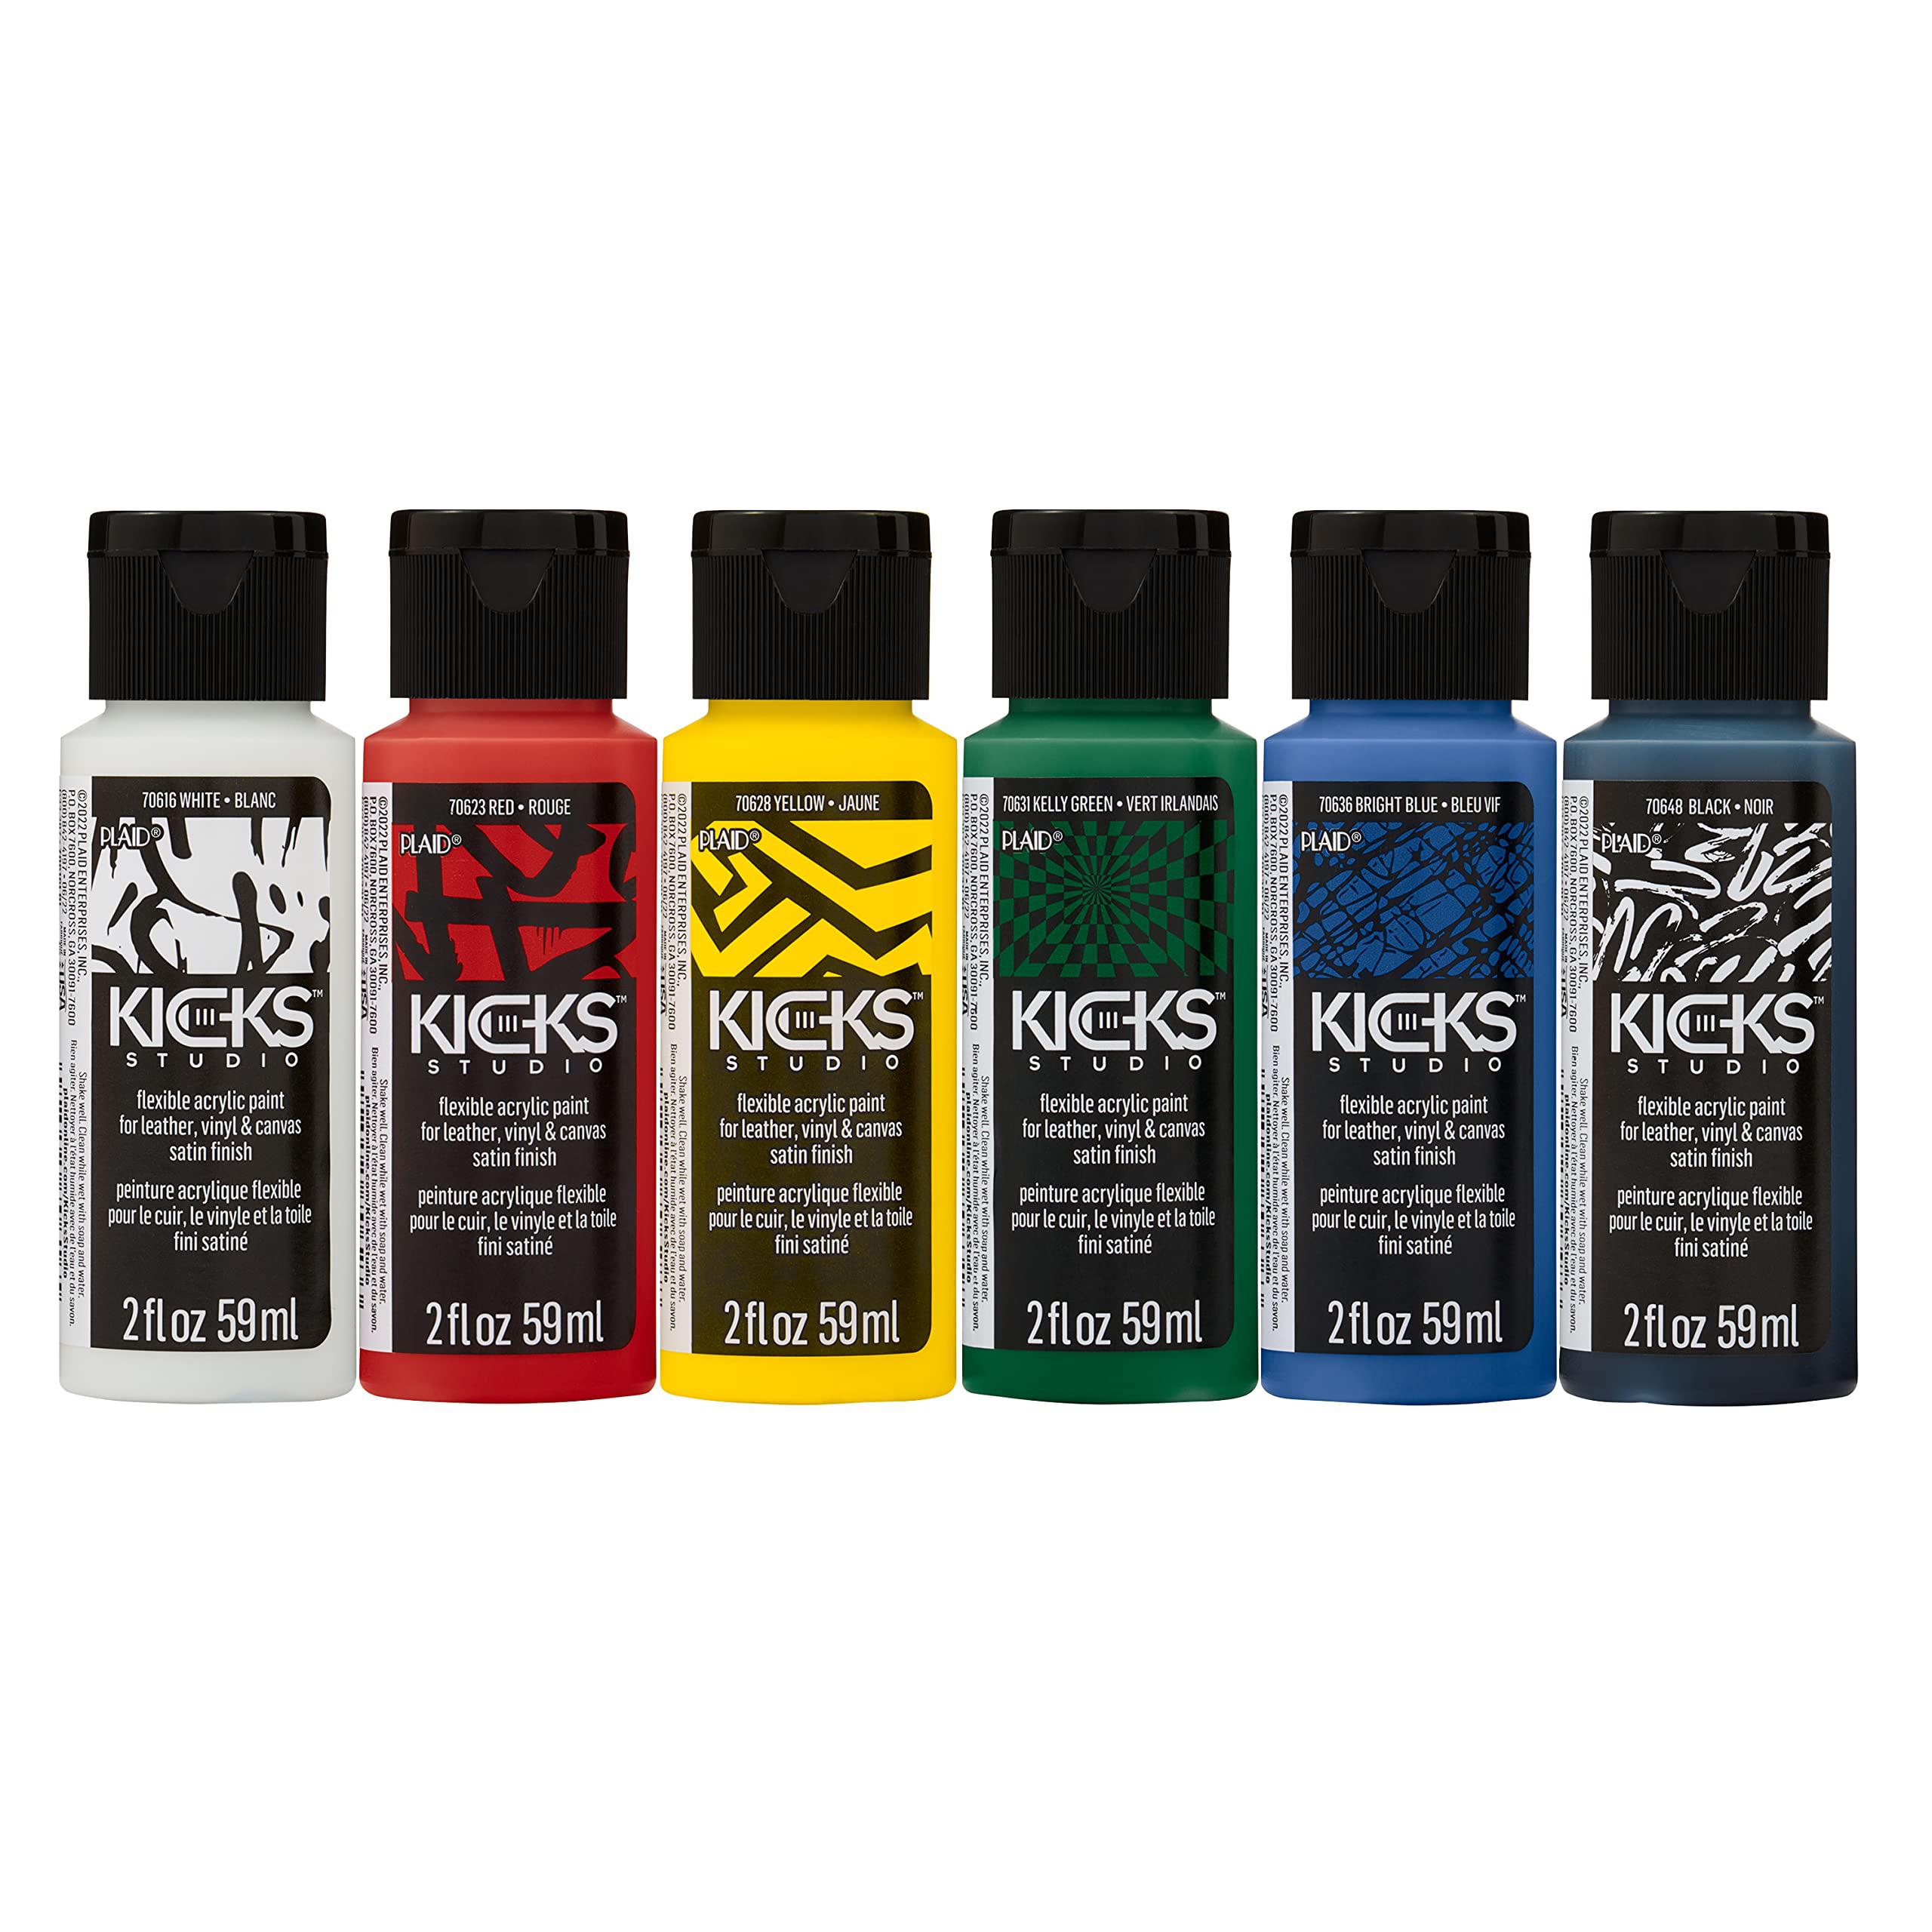 plaid kicks studio acrylic paint set of 6 2 fl oz flexible acrylic paint for leather, vinyl, and other diy arts and crafts su